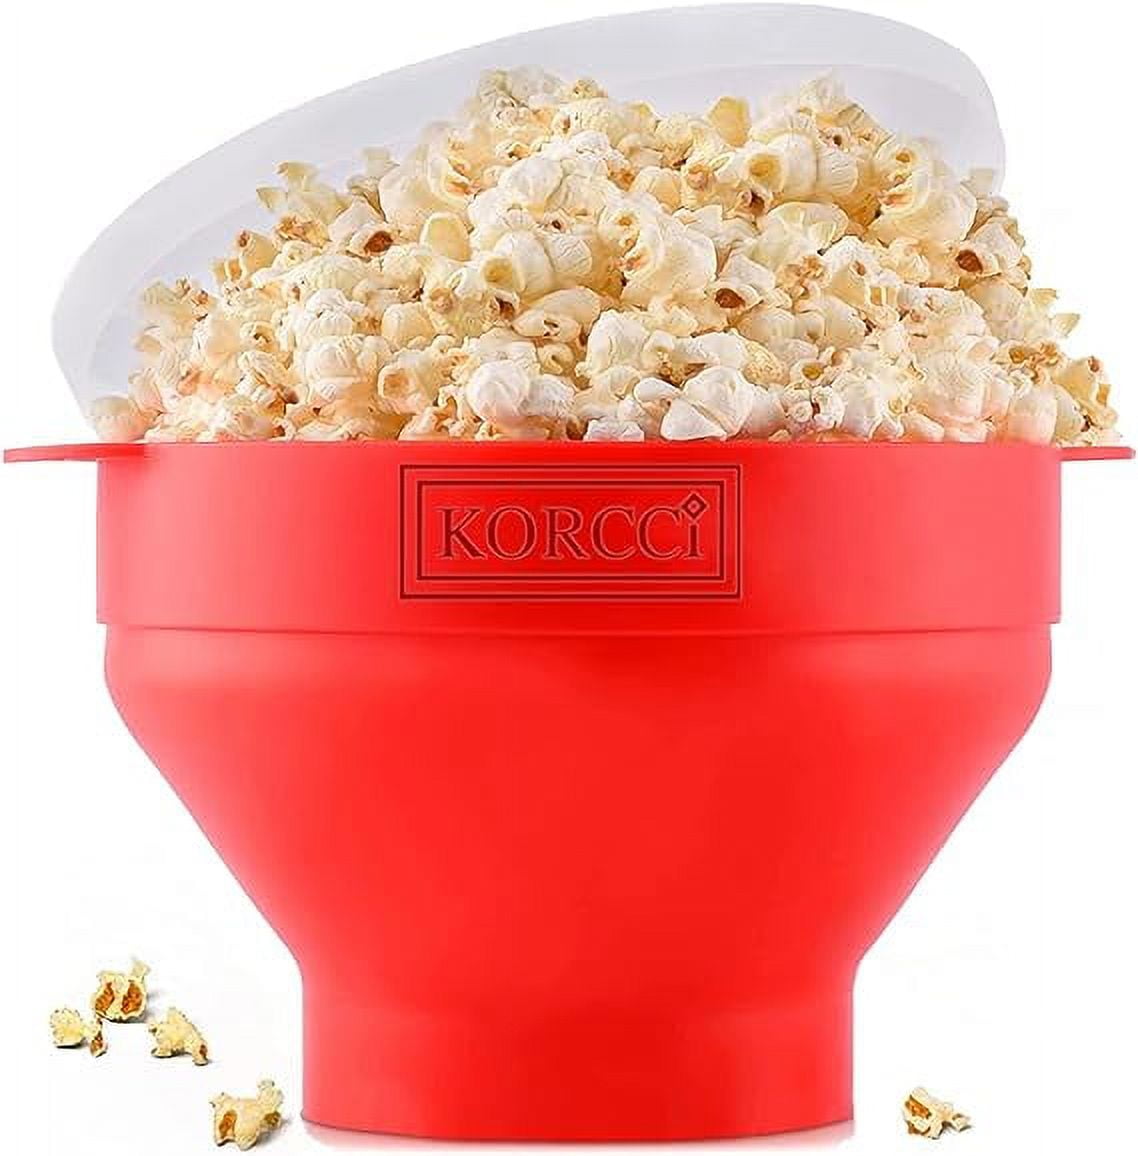 W&P Microwave Silicone Personal Popcorn Popper Maker | Red | Collapsible  Bowl w/Built In Measuring Cup, BPA Free, Eco-Friendly, Waste Free, 4 Cups  of